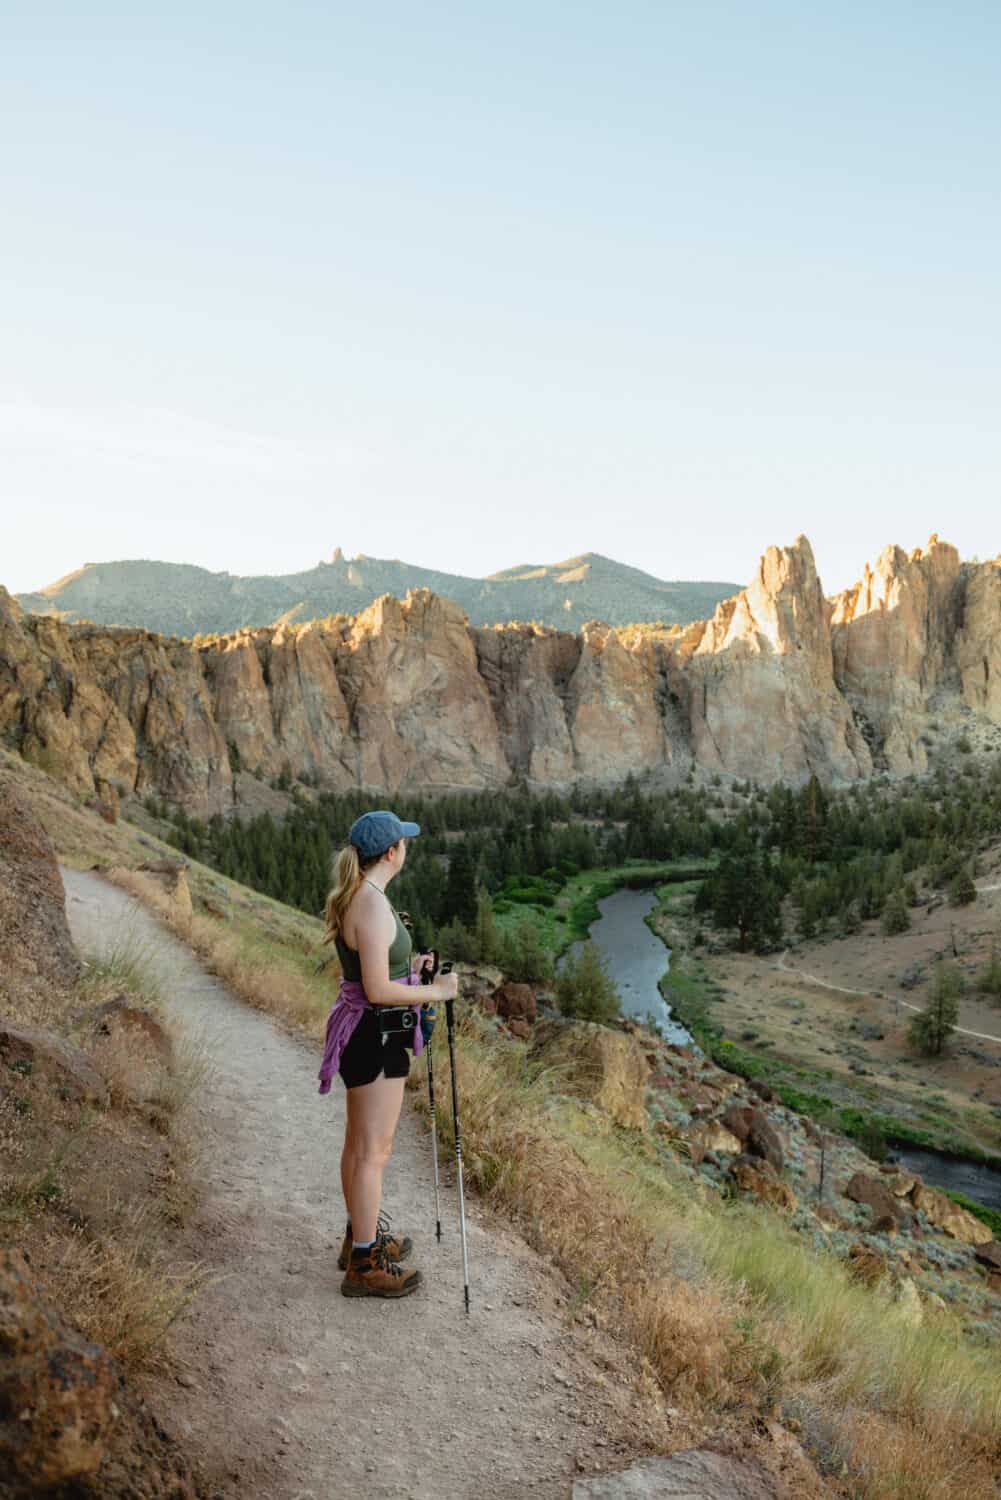 Best Hikes in Bend Oregon - Smith Rock State Park